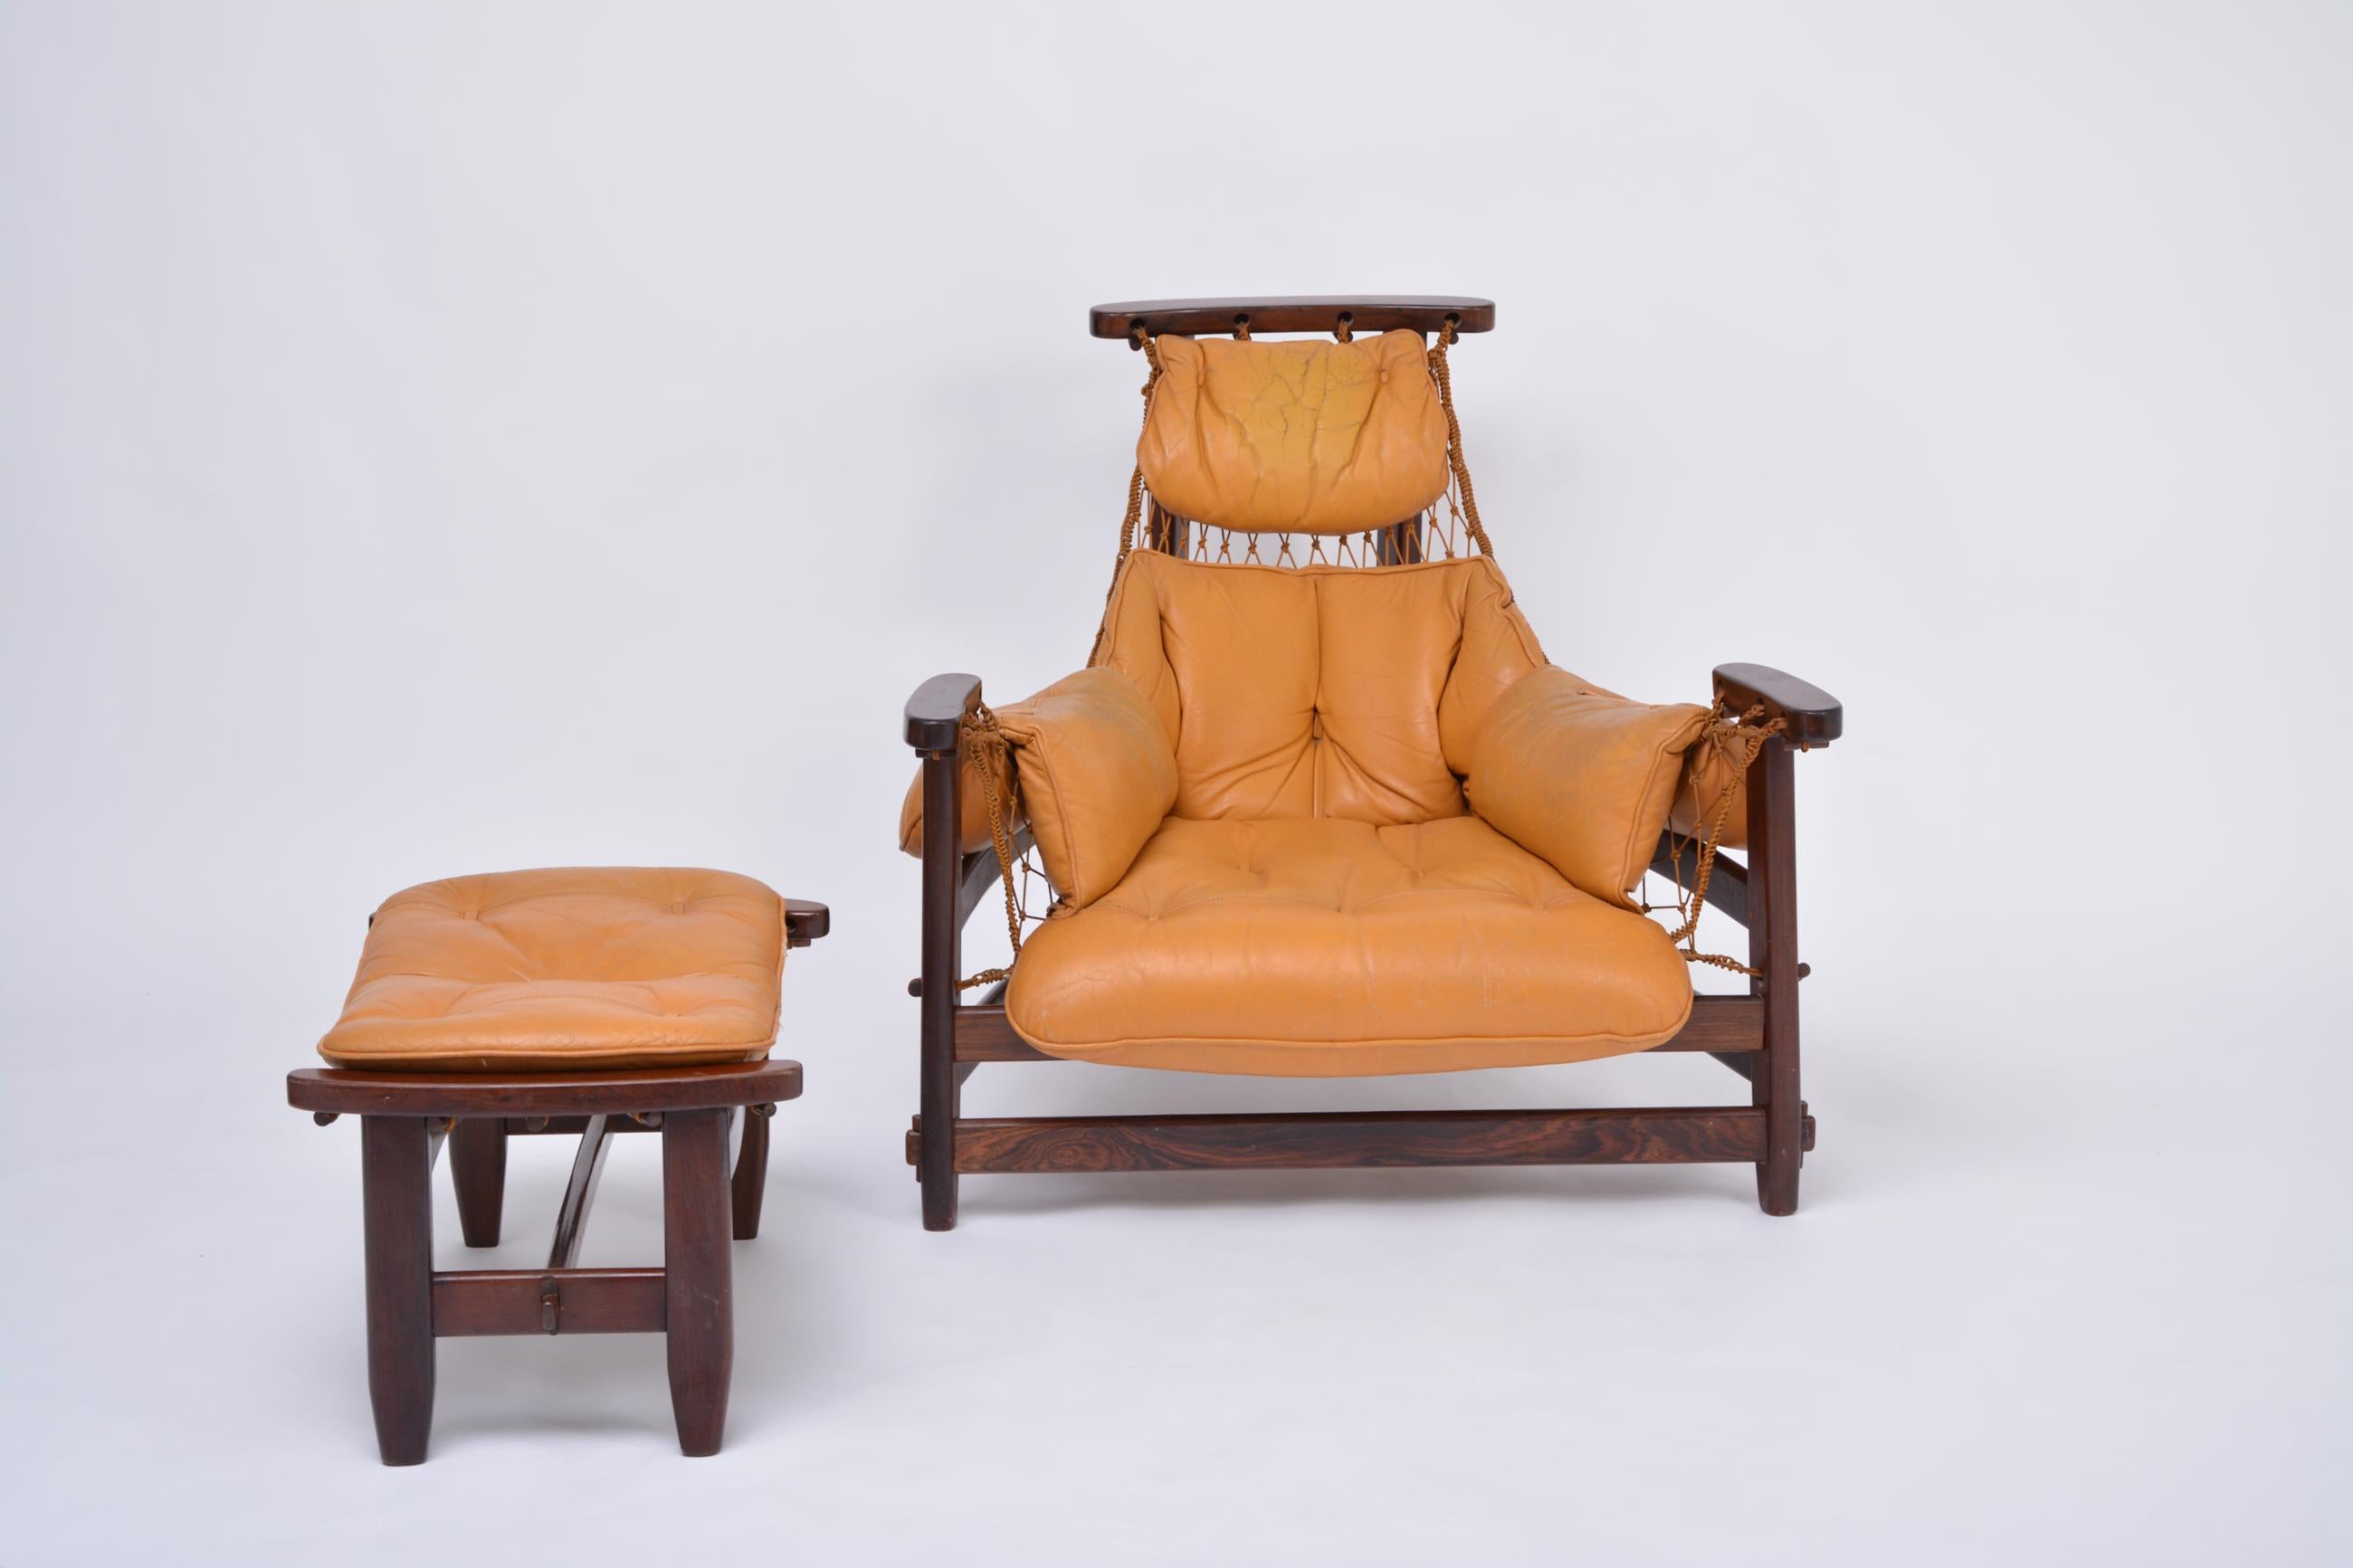 Iconic Brazilian Jangada lounge chair with ottoman by Jean Gillon, 1968
Romanian-born, naturalized Brazilian Jean Gillon was an architect-designer best known for his design firm Italma WoodArt, for which he designed a range of furniture collections